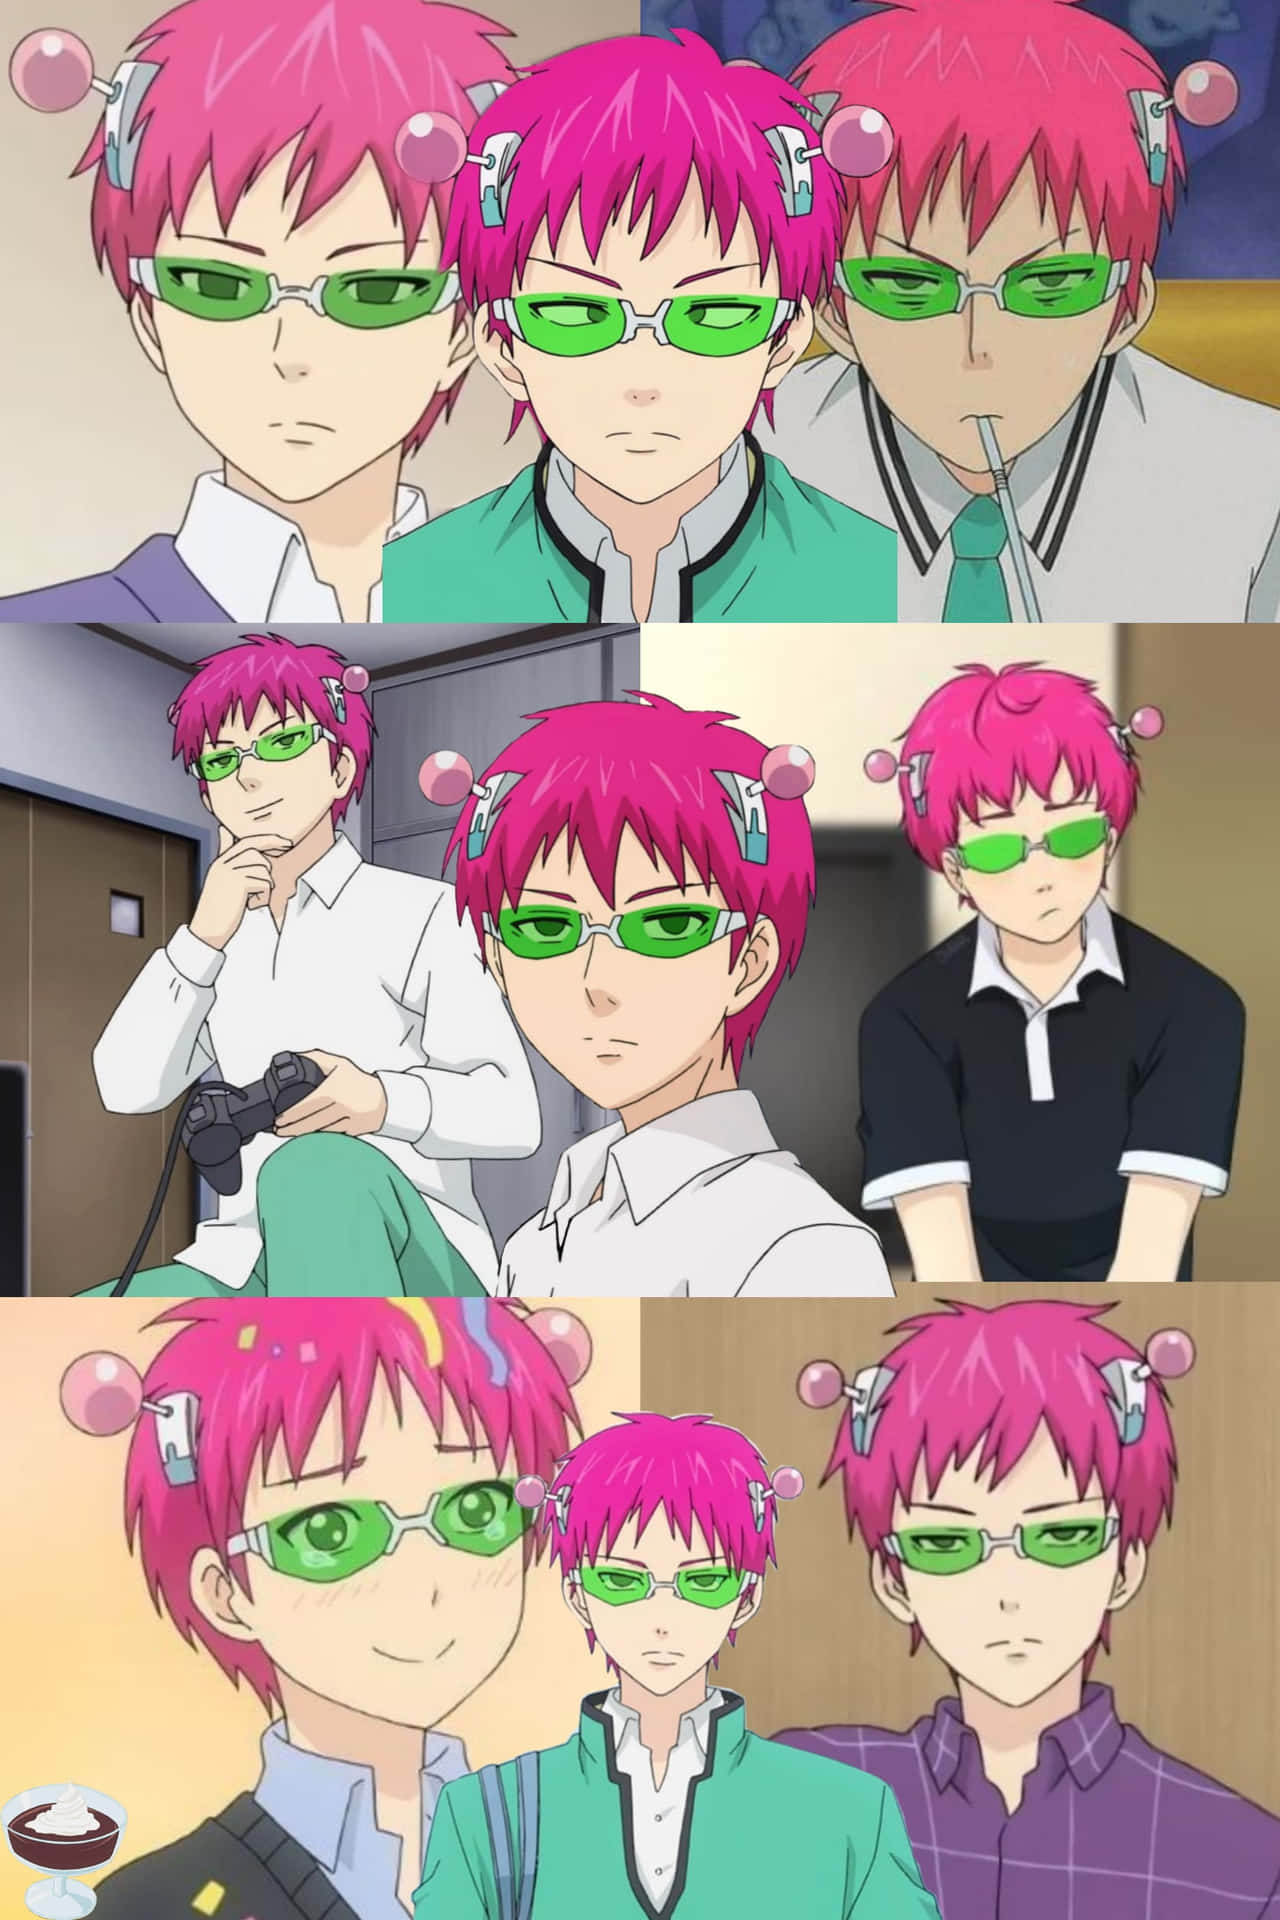 A Collage Of Anime Characters With Pink Hair And Green Glasses Wallpaper